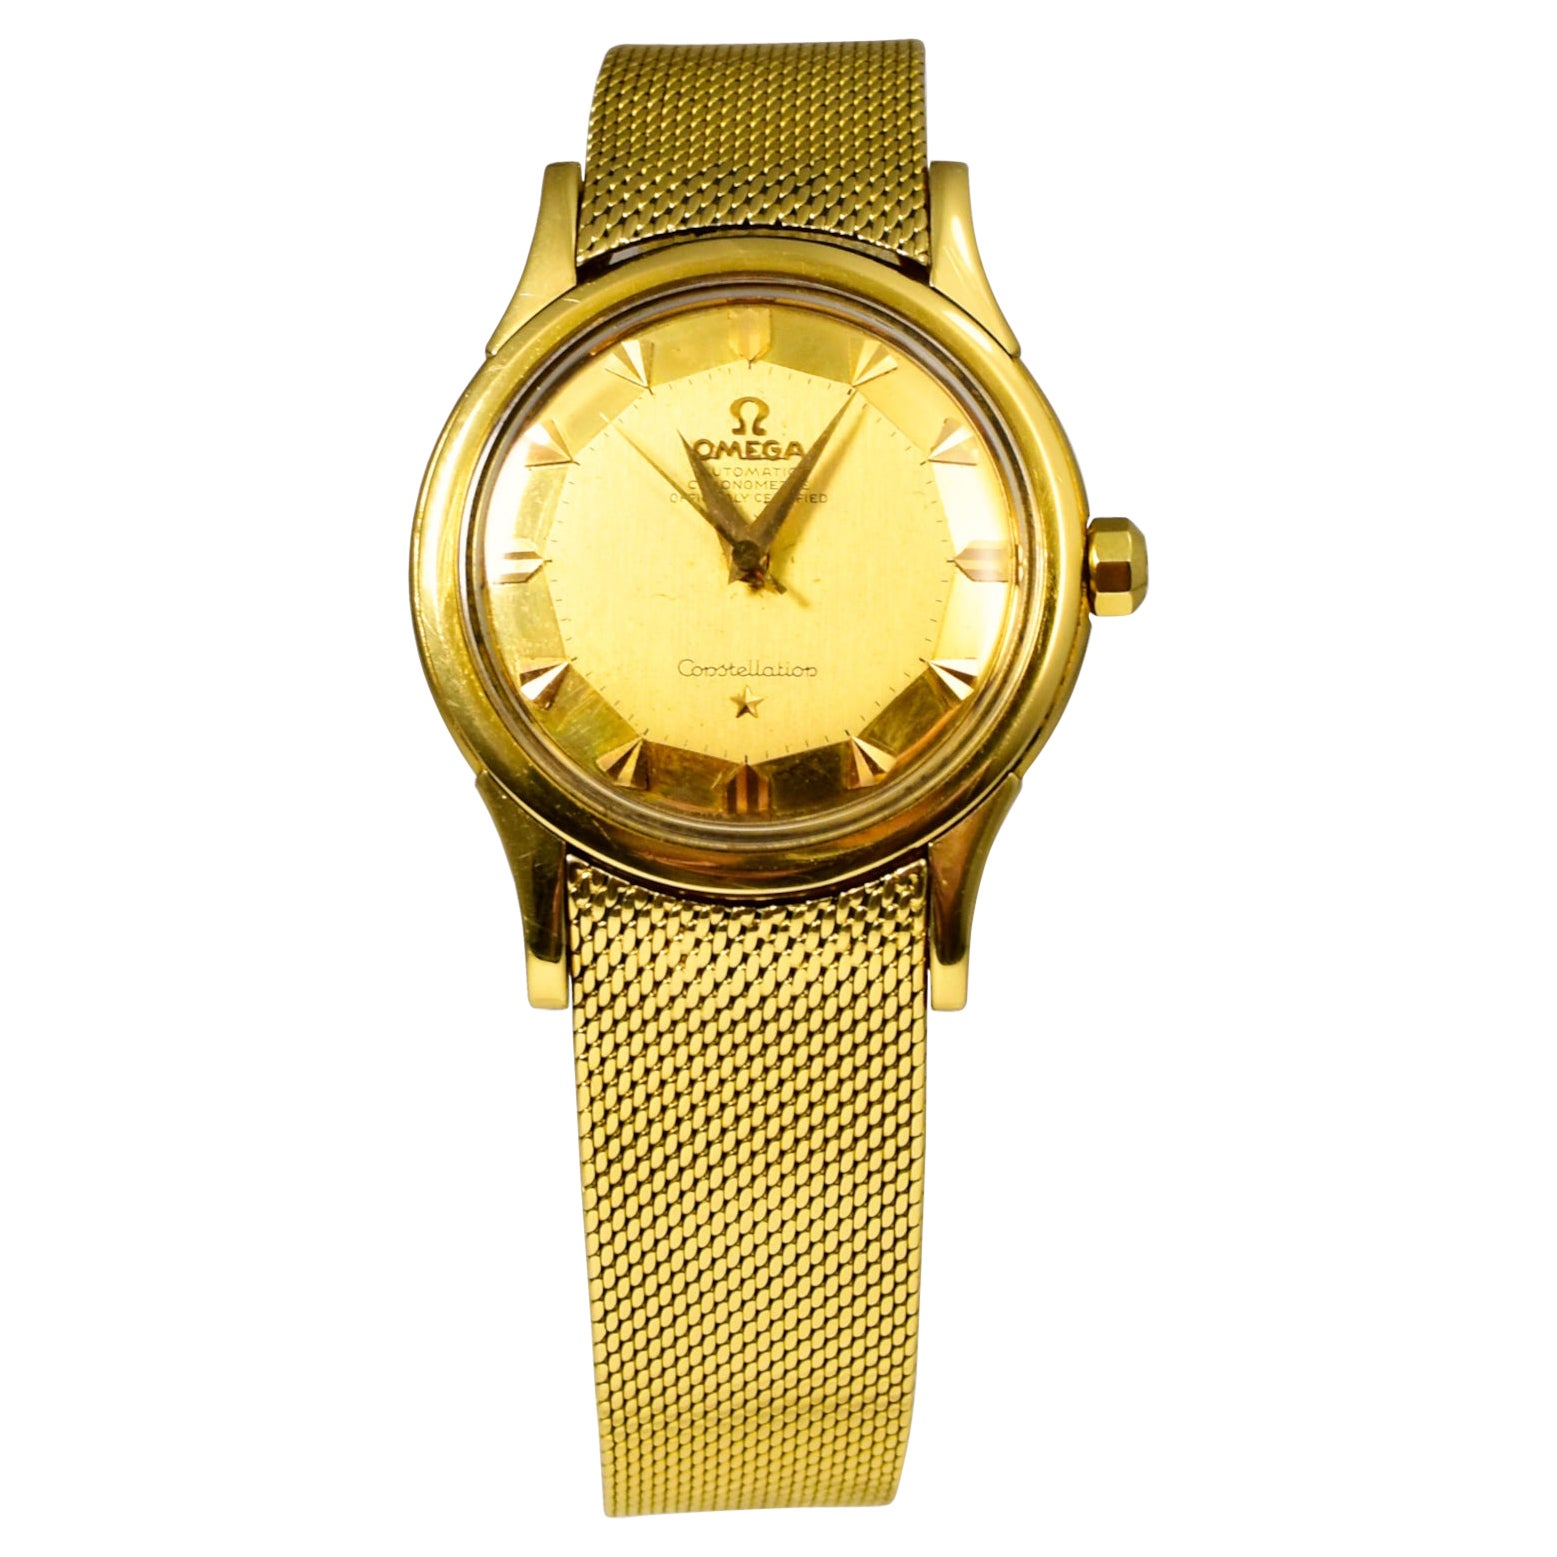 Omega Constellation Ref. 168.005 “PIE-PAN” Dial 18k Yellow Gold Watch